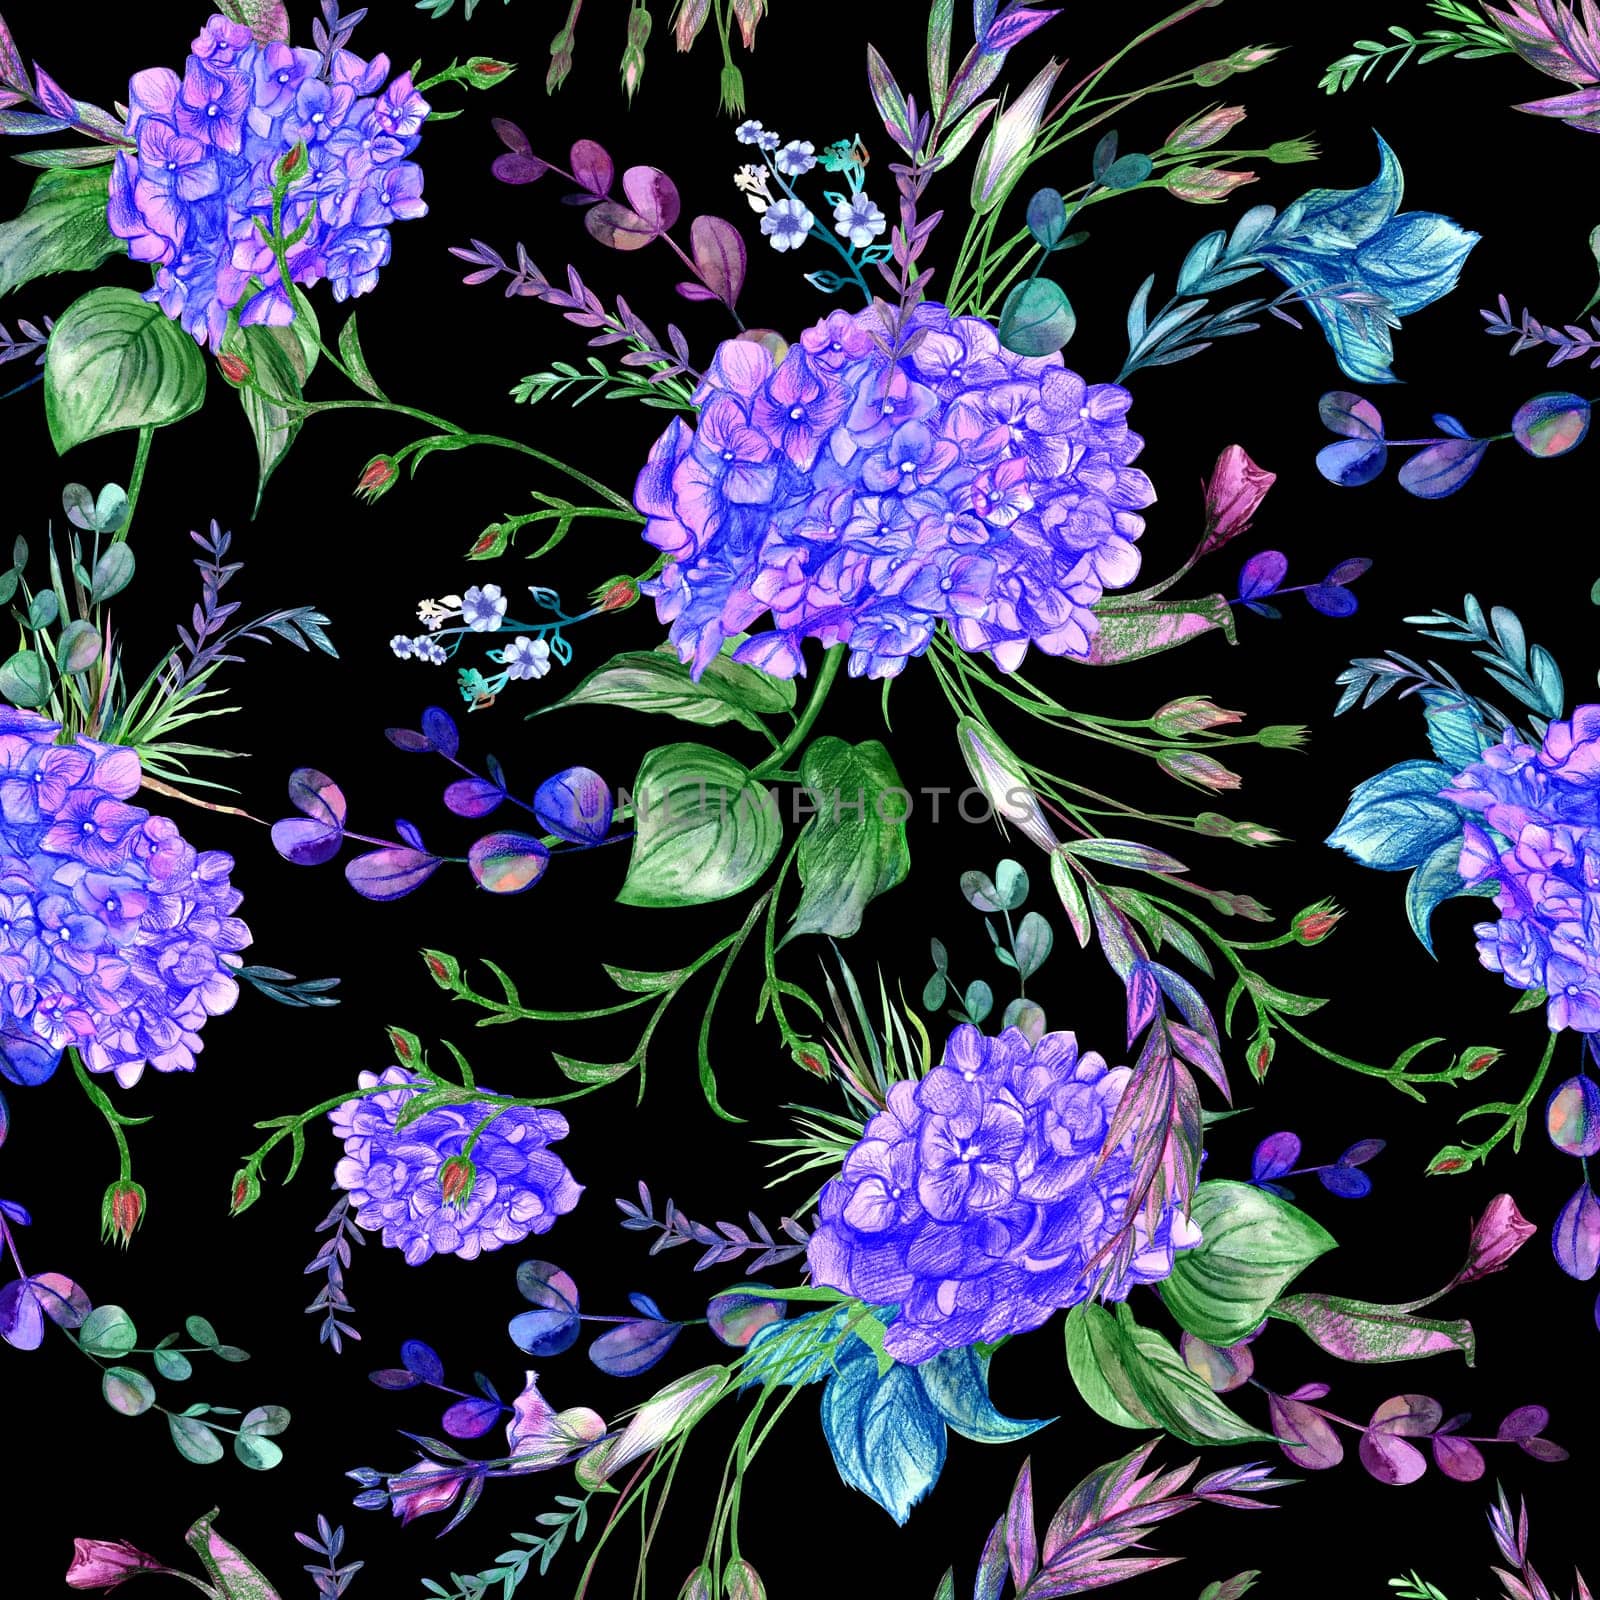 Summer watercolor seamless pattern with bright hydrangeas on a black background by MarinaVoyush